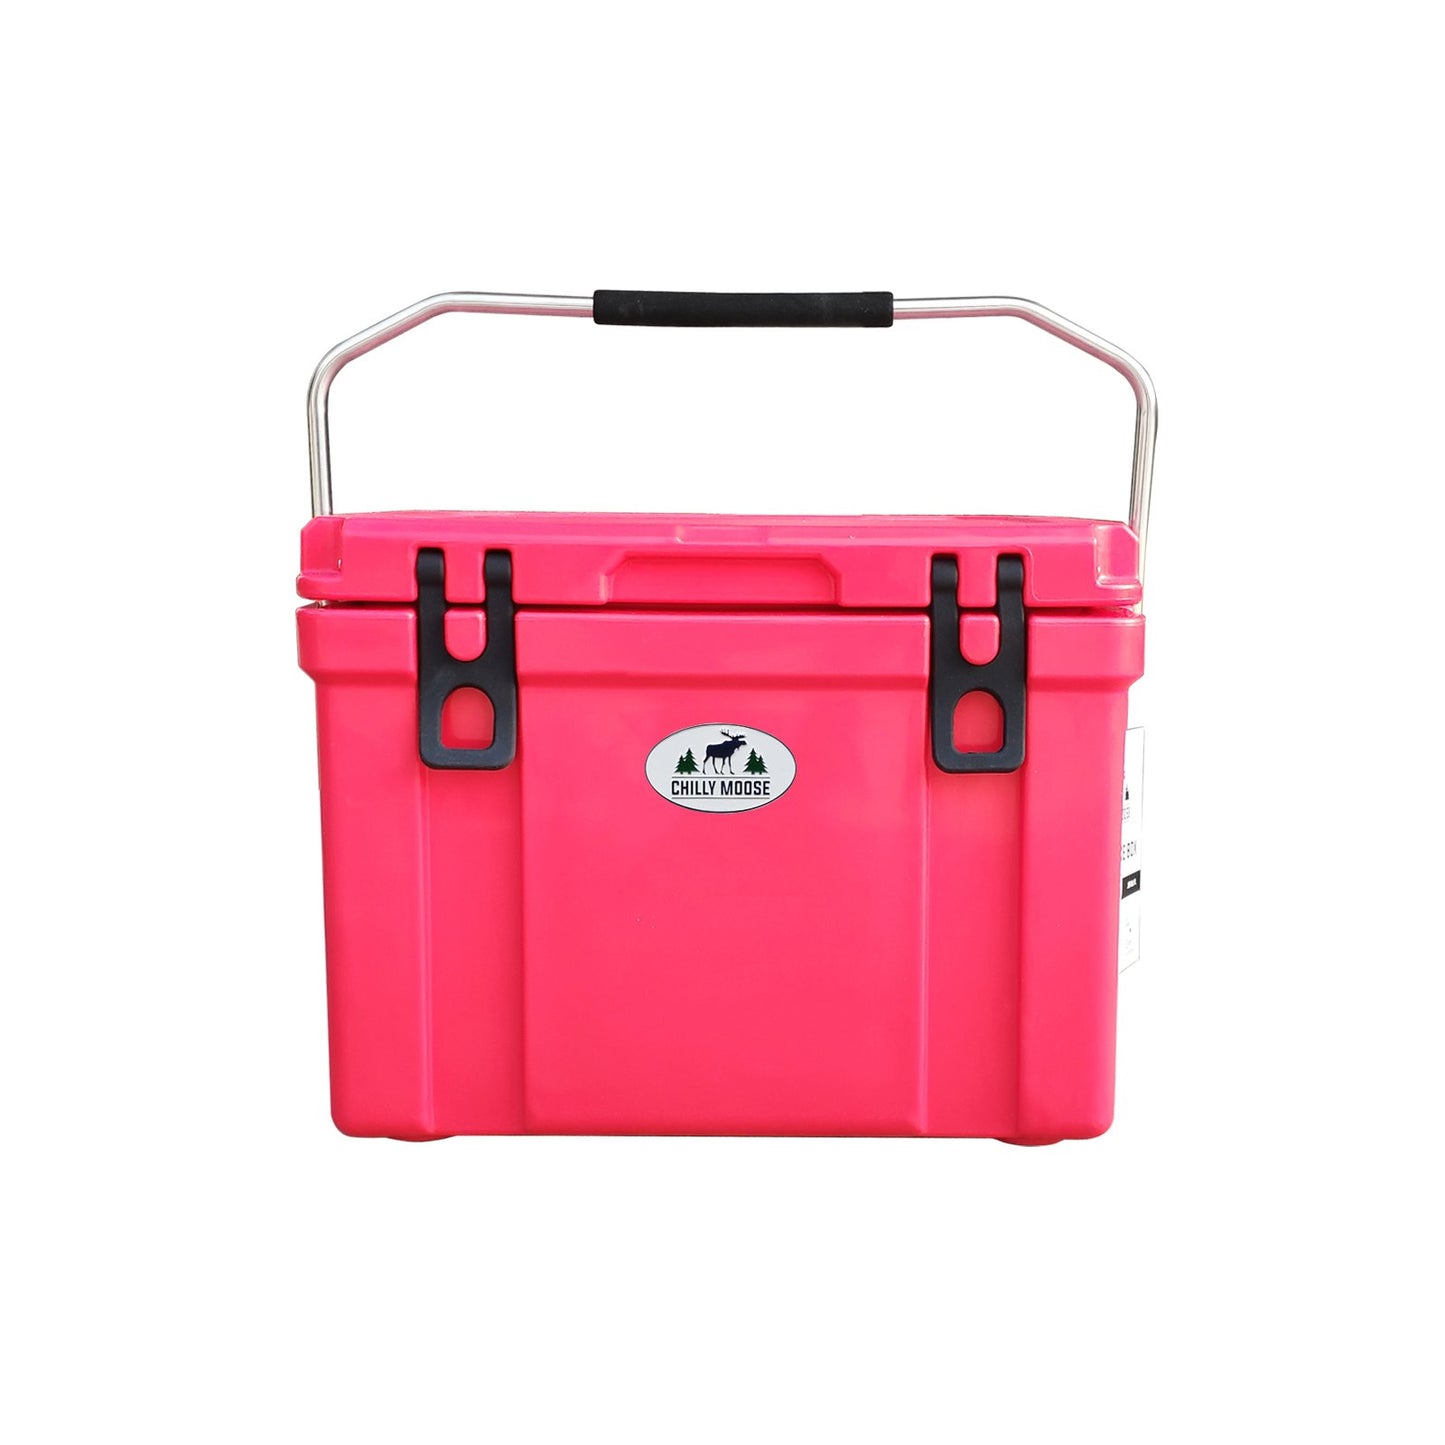 Chilly Ice Box 25L